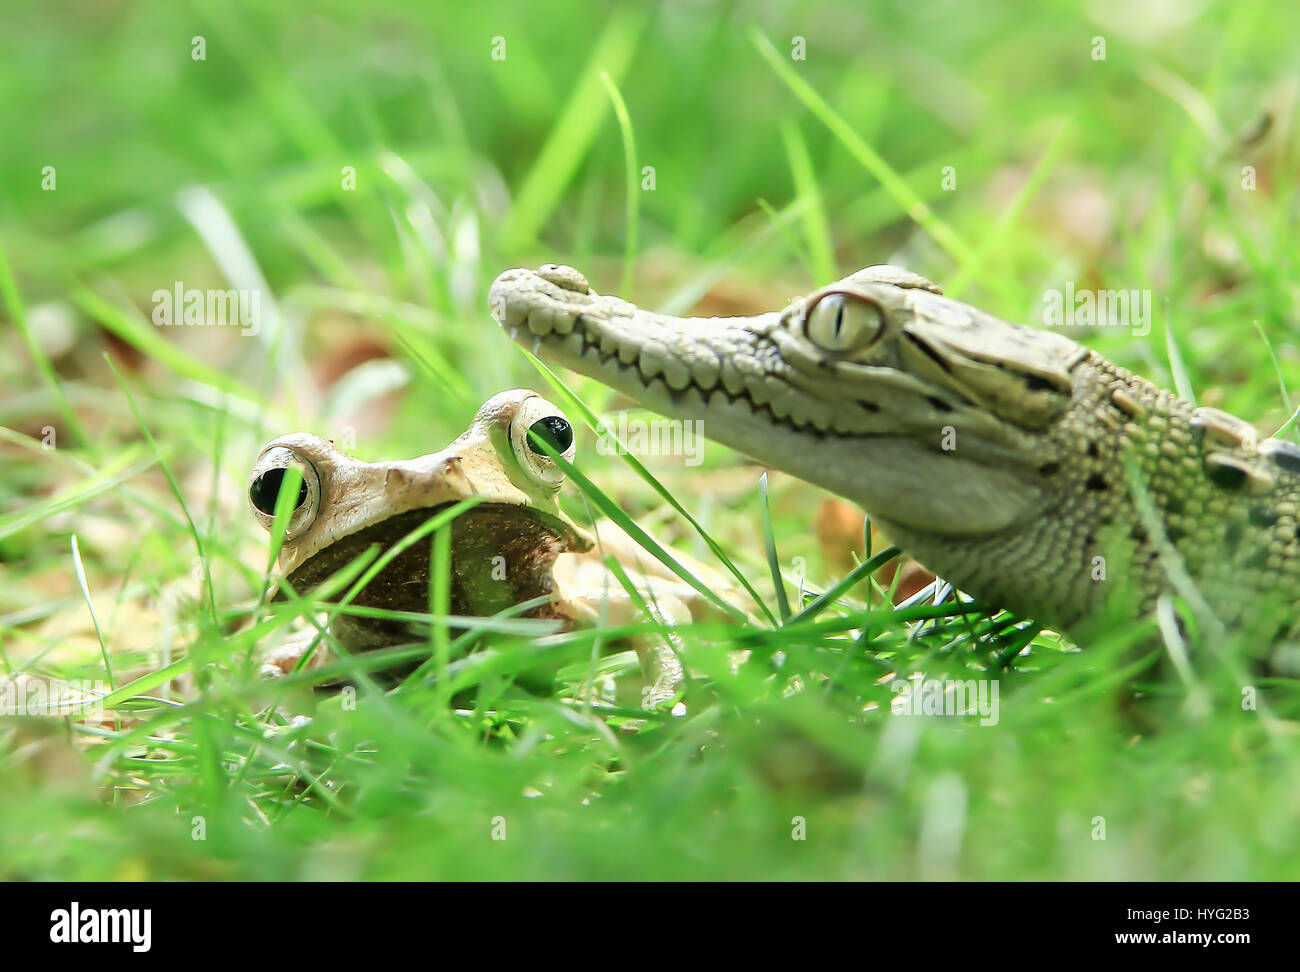 JAVA, INDONESIA: THE INCREDIBLE moment a baby crocodile decided to climb onto the head of a hapless frog has been captured by an awe-struck industry manager. In a move that the most seasoned naturalist would find extraordinary, this foot-long baby crocodile can be seen clambering onto the back of a Javan treefrog, who turned the tables on this normally fearsome predator by mounting the reptile’s head. Local manager Tanto Yensen (36) took the pictures while out walking in Tangerang, Indonesia. Stock Photo